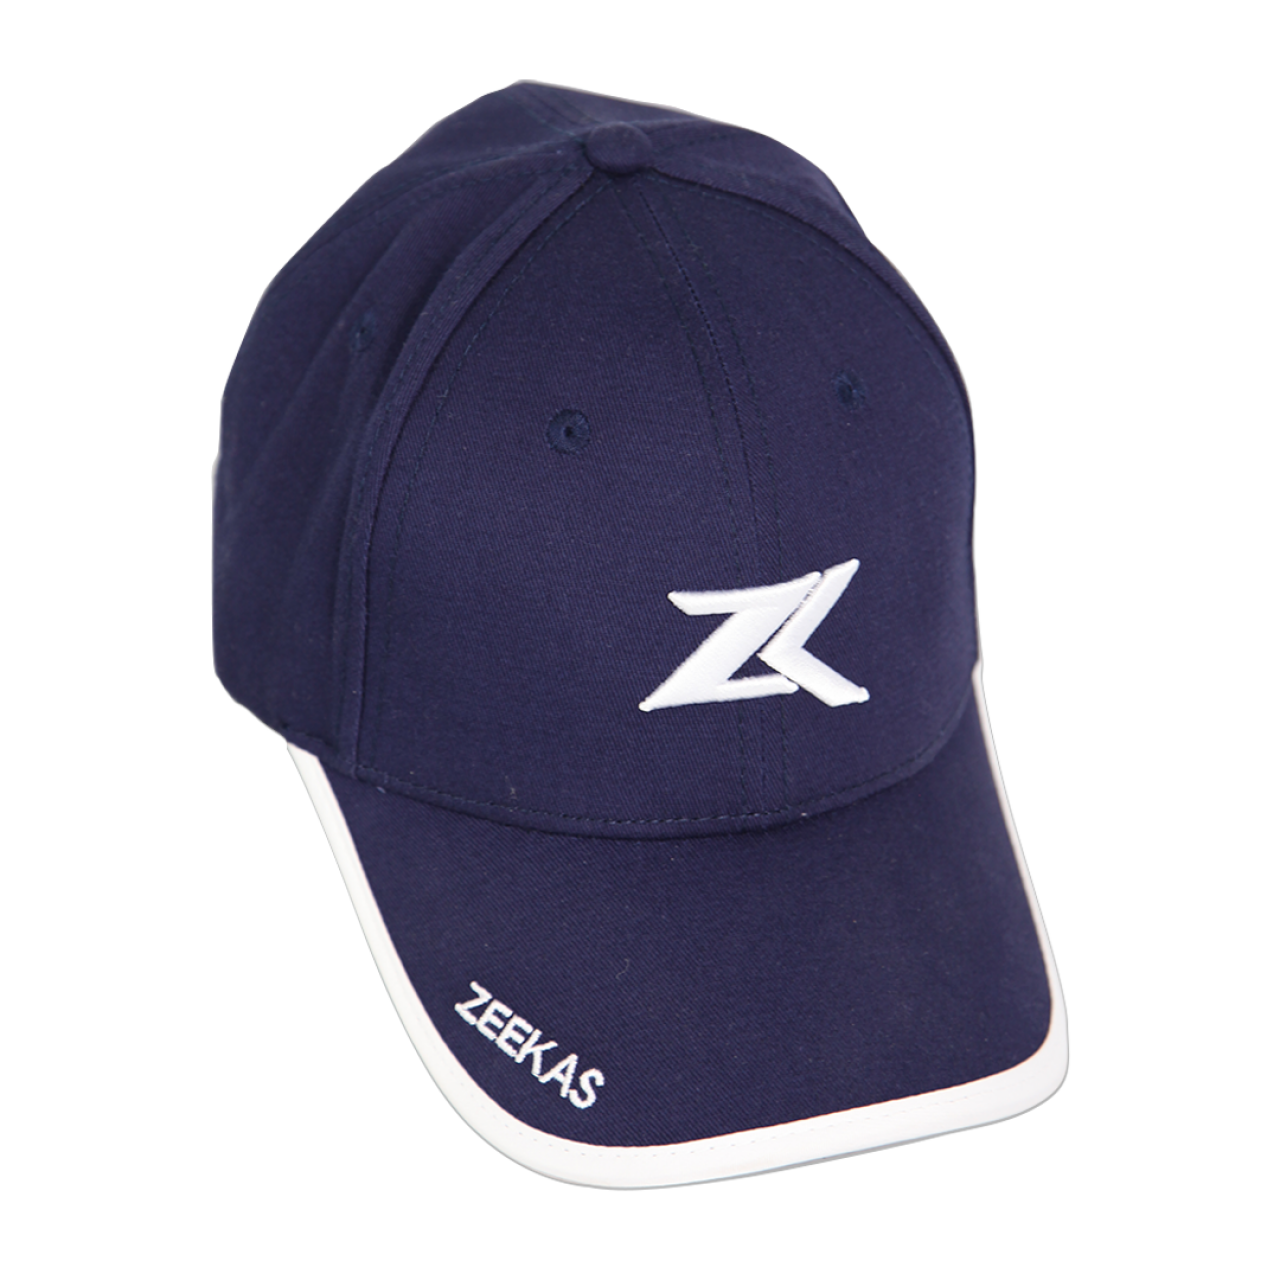 Zeekas ZK Navy Blue Baseball Cap with Brand Embroidery Hat For Men and  Women, $24.99,